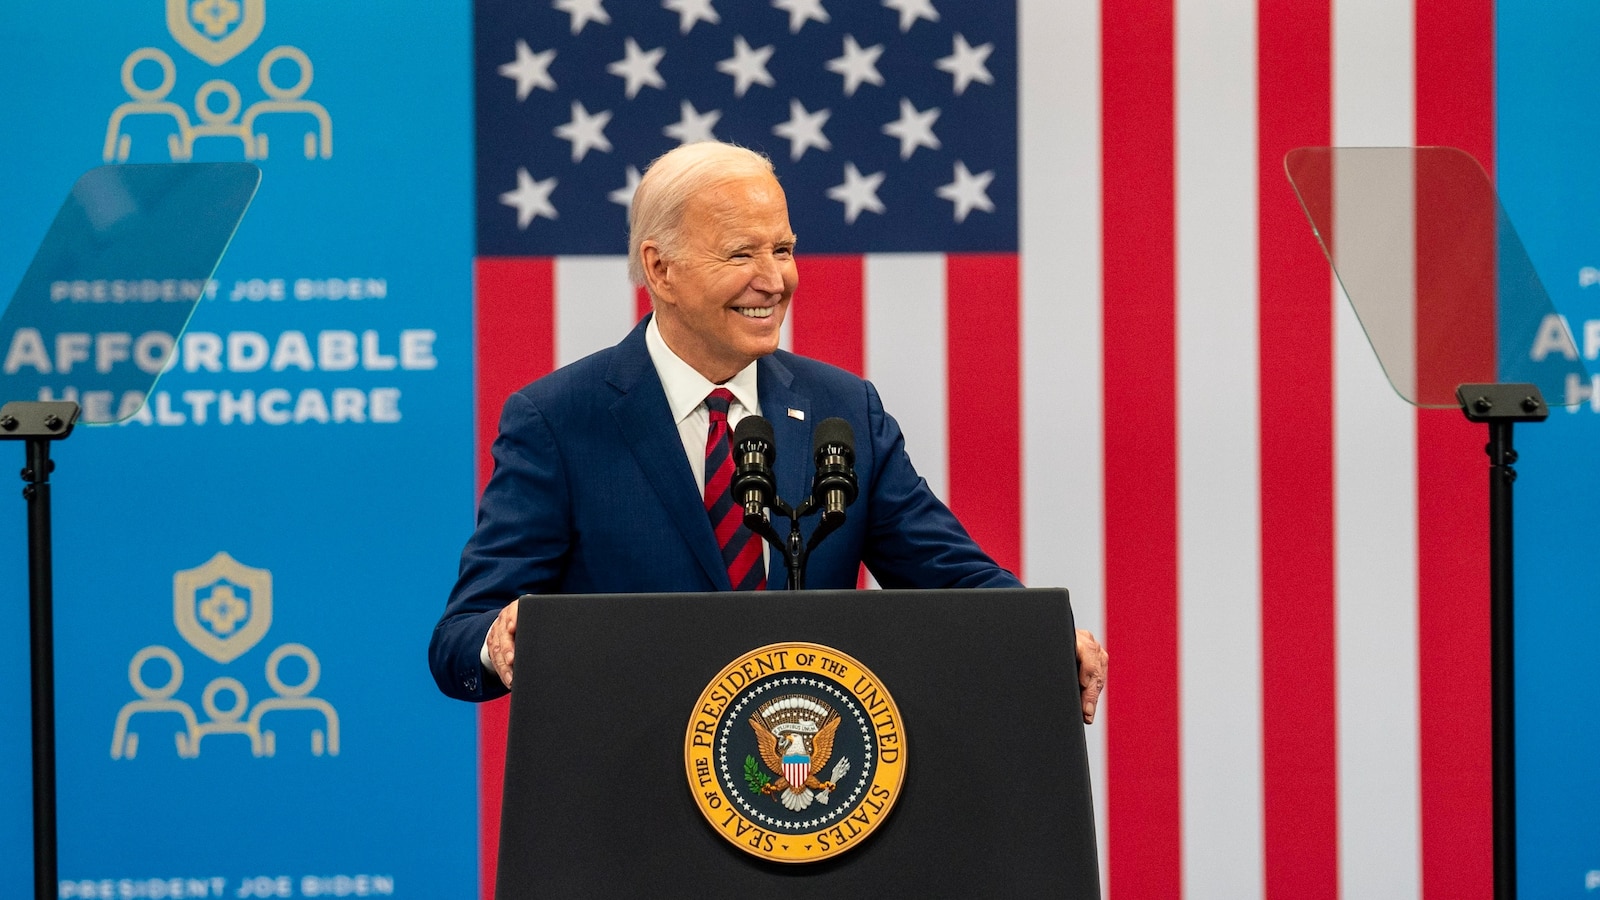 Biden to discuss new student loan forgiveness plan in Wisconsin on Monday: Sources [Video]